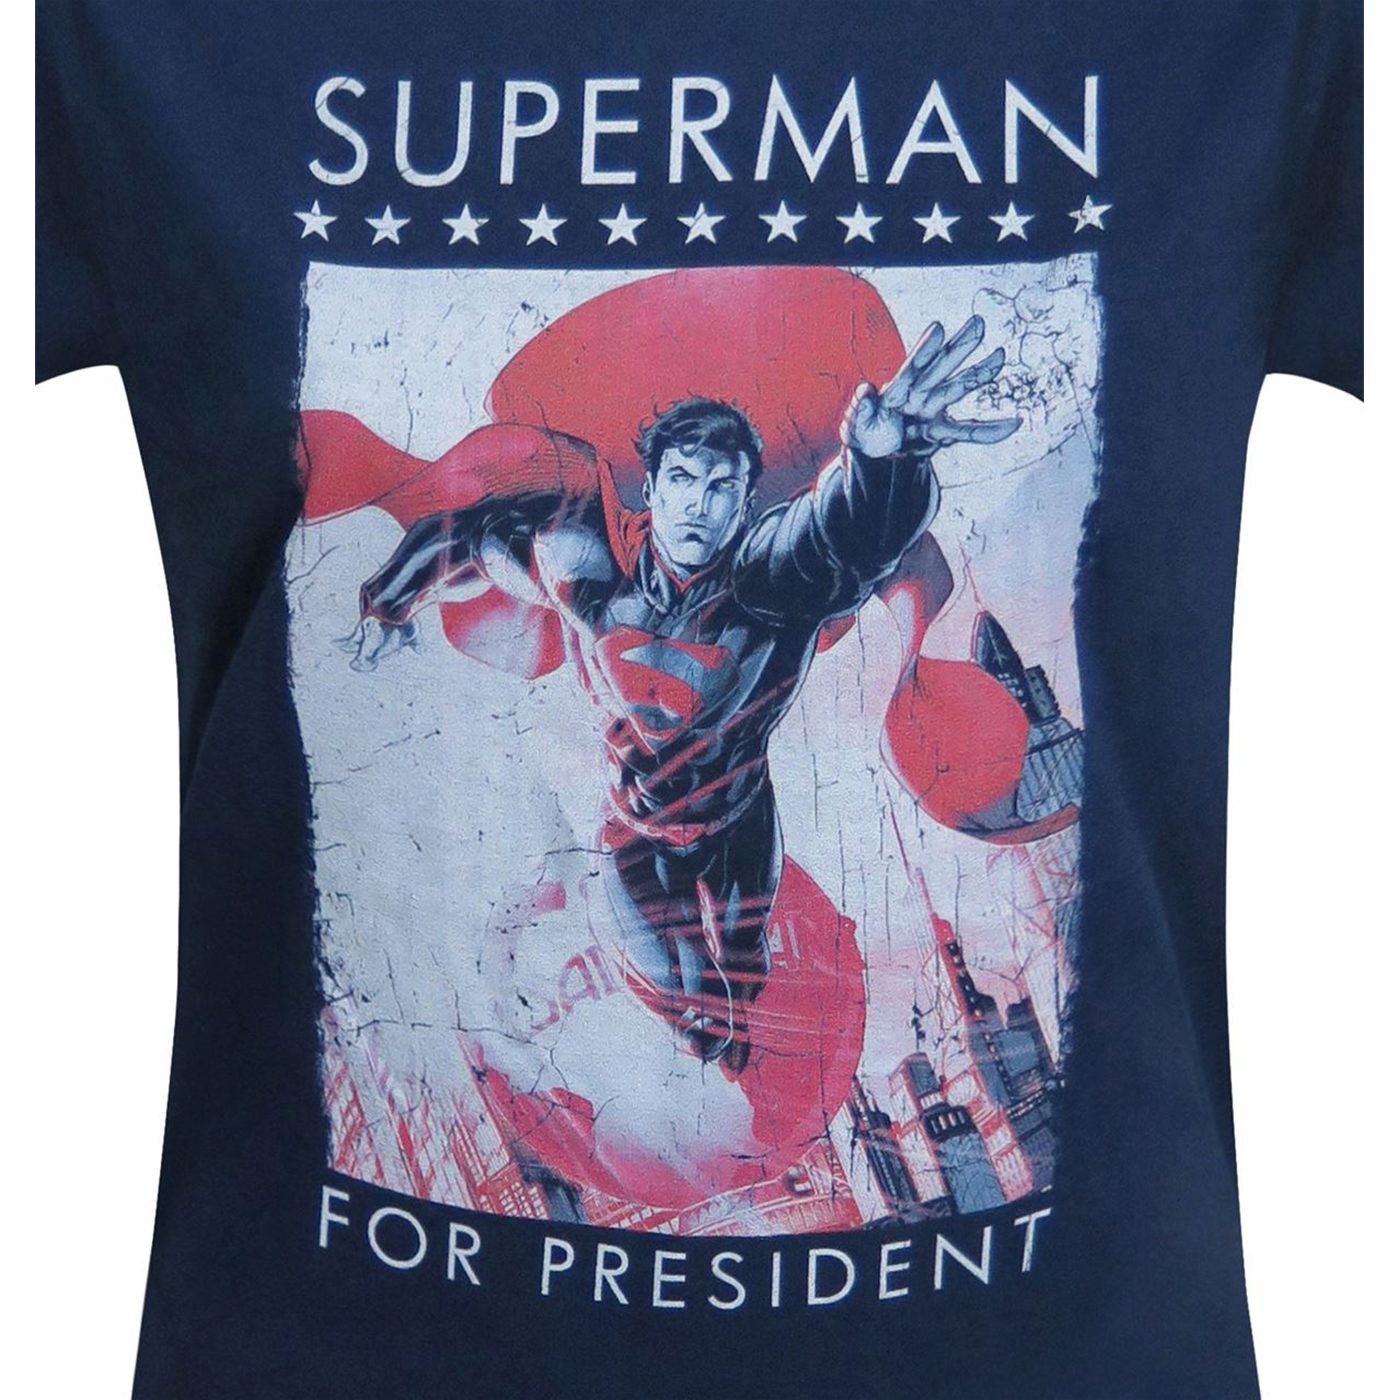 Superman for President Clouds Women's T-Shirt